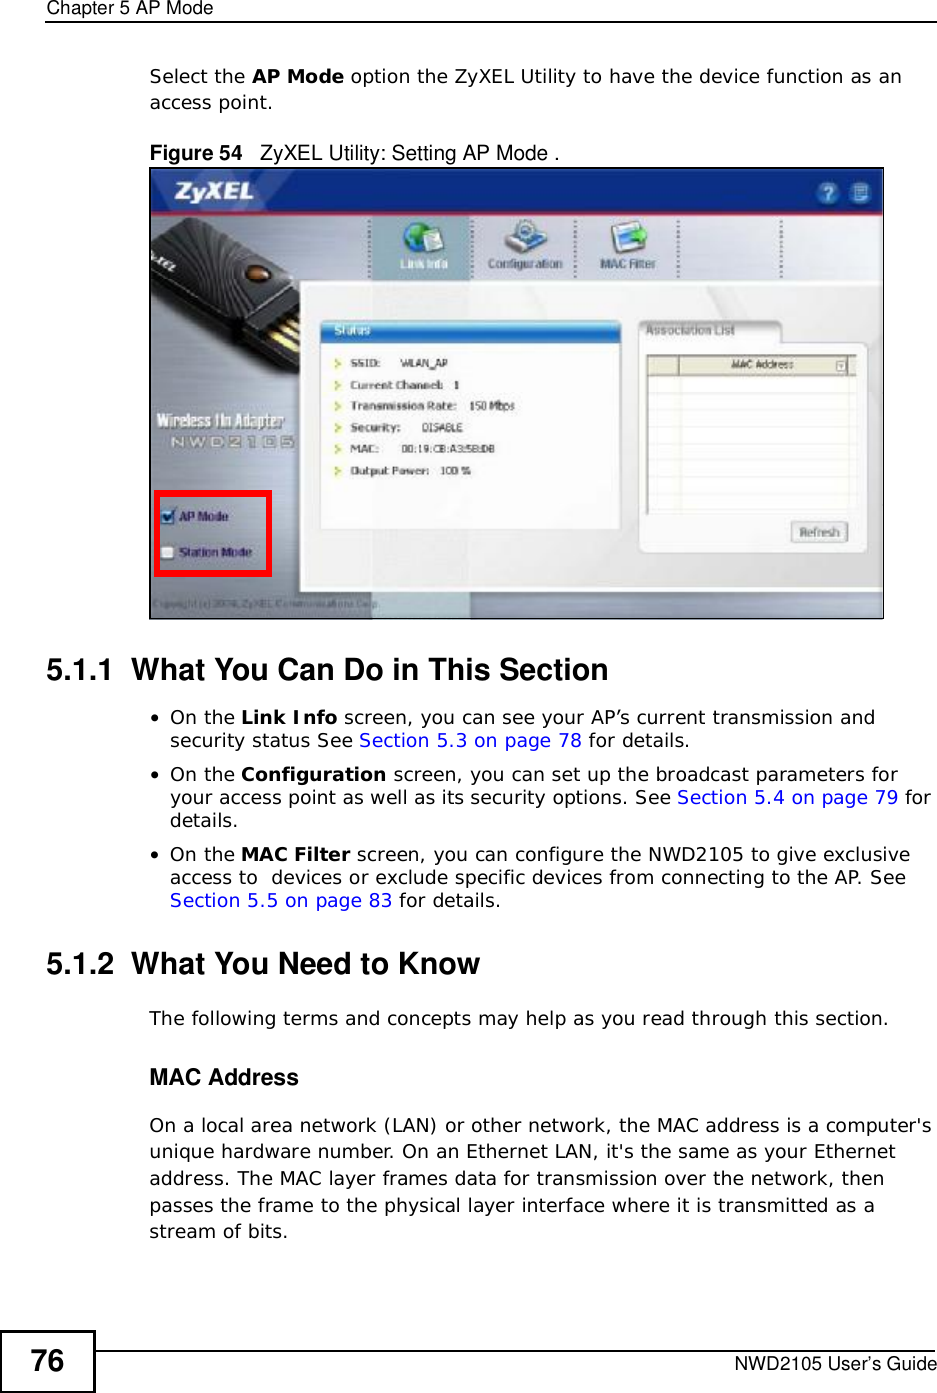 Chapter 5AP ModeNWD2105 User’s Guide76Select the AP Mode option the ZyXEL Utility to have the device function as an access point.Figure 54   ZyXEL Utility: Setting AP Mode .5.1.1  What You Can Do in This Section•On the Link Info screen, you can see your AP’s current transmission and security status See Section 5.3 on page 78 for details.•On the Configuration screen, you can set up the broadcast parameters for your access point as well as its security options. See Section 5.4 on page 79 for details.•On the MAC Filter screen, you can configure the NWD2105 to give exclusive access to  devices or exclude specific devices from connecting to the AP. See Section 5.5 on page 83 for details.5.1.2  What You Need to KnowThe following terms and concepts may help as you read through this section.MAC AddressOn a local area network (LAN) or other network, the MAC address is a computer&apos;s unique hardware number. On an Ethernet LAN, it&apos;s the same as your Ethernet address. The MAC layer frames data for transmission over the network, then passes the frame to the physical layer interface where it is transmitted as a stream of bits.